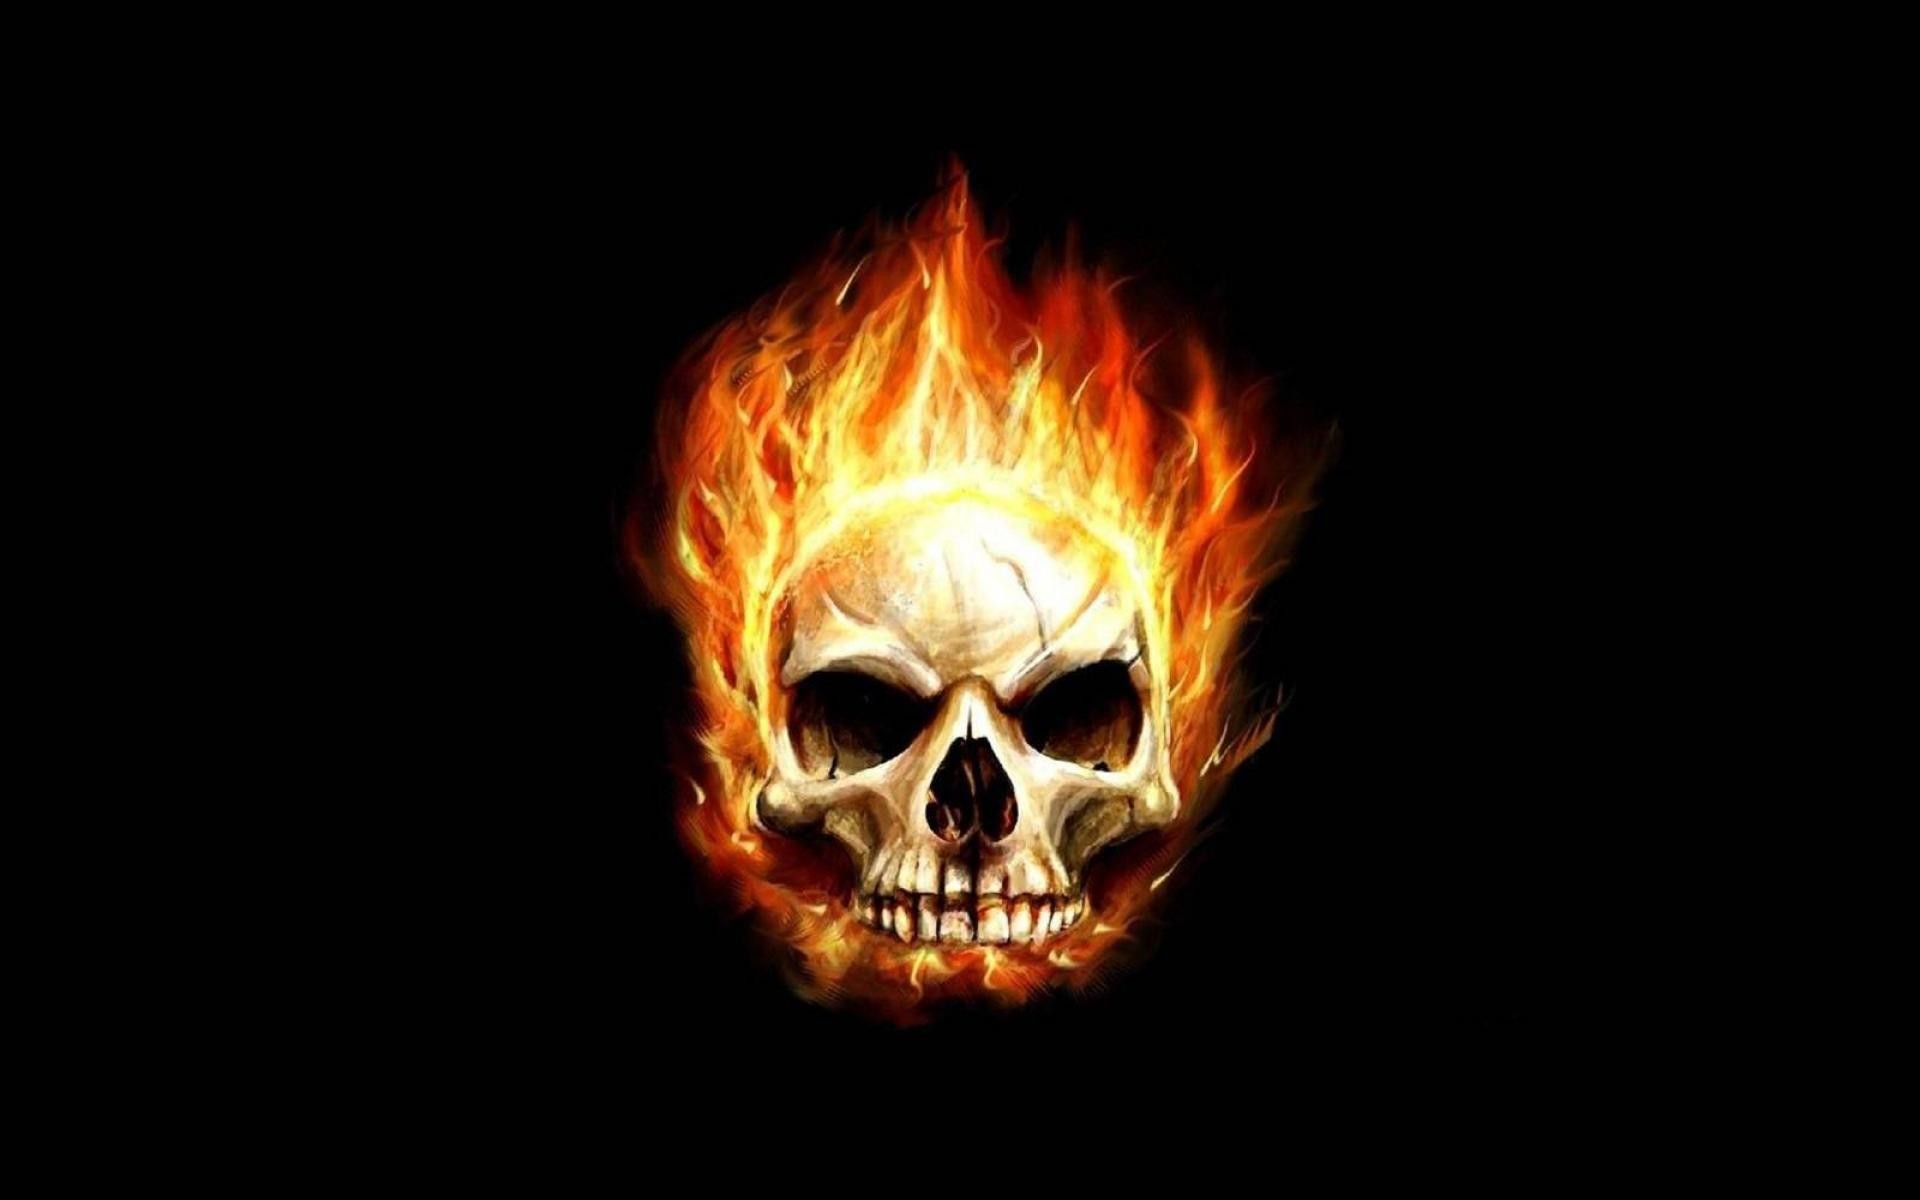 1920x1200 Most Downloaded Fire Skull Wallpapers - Full HD wallpaper search